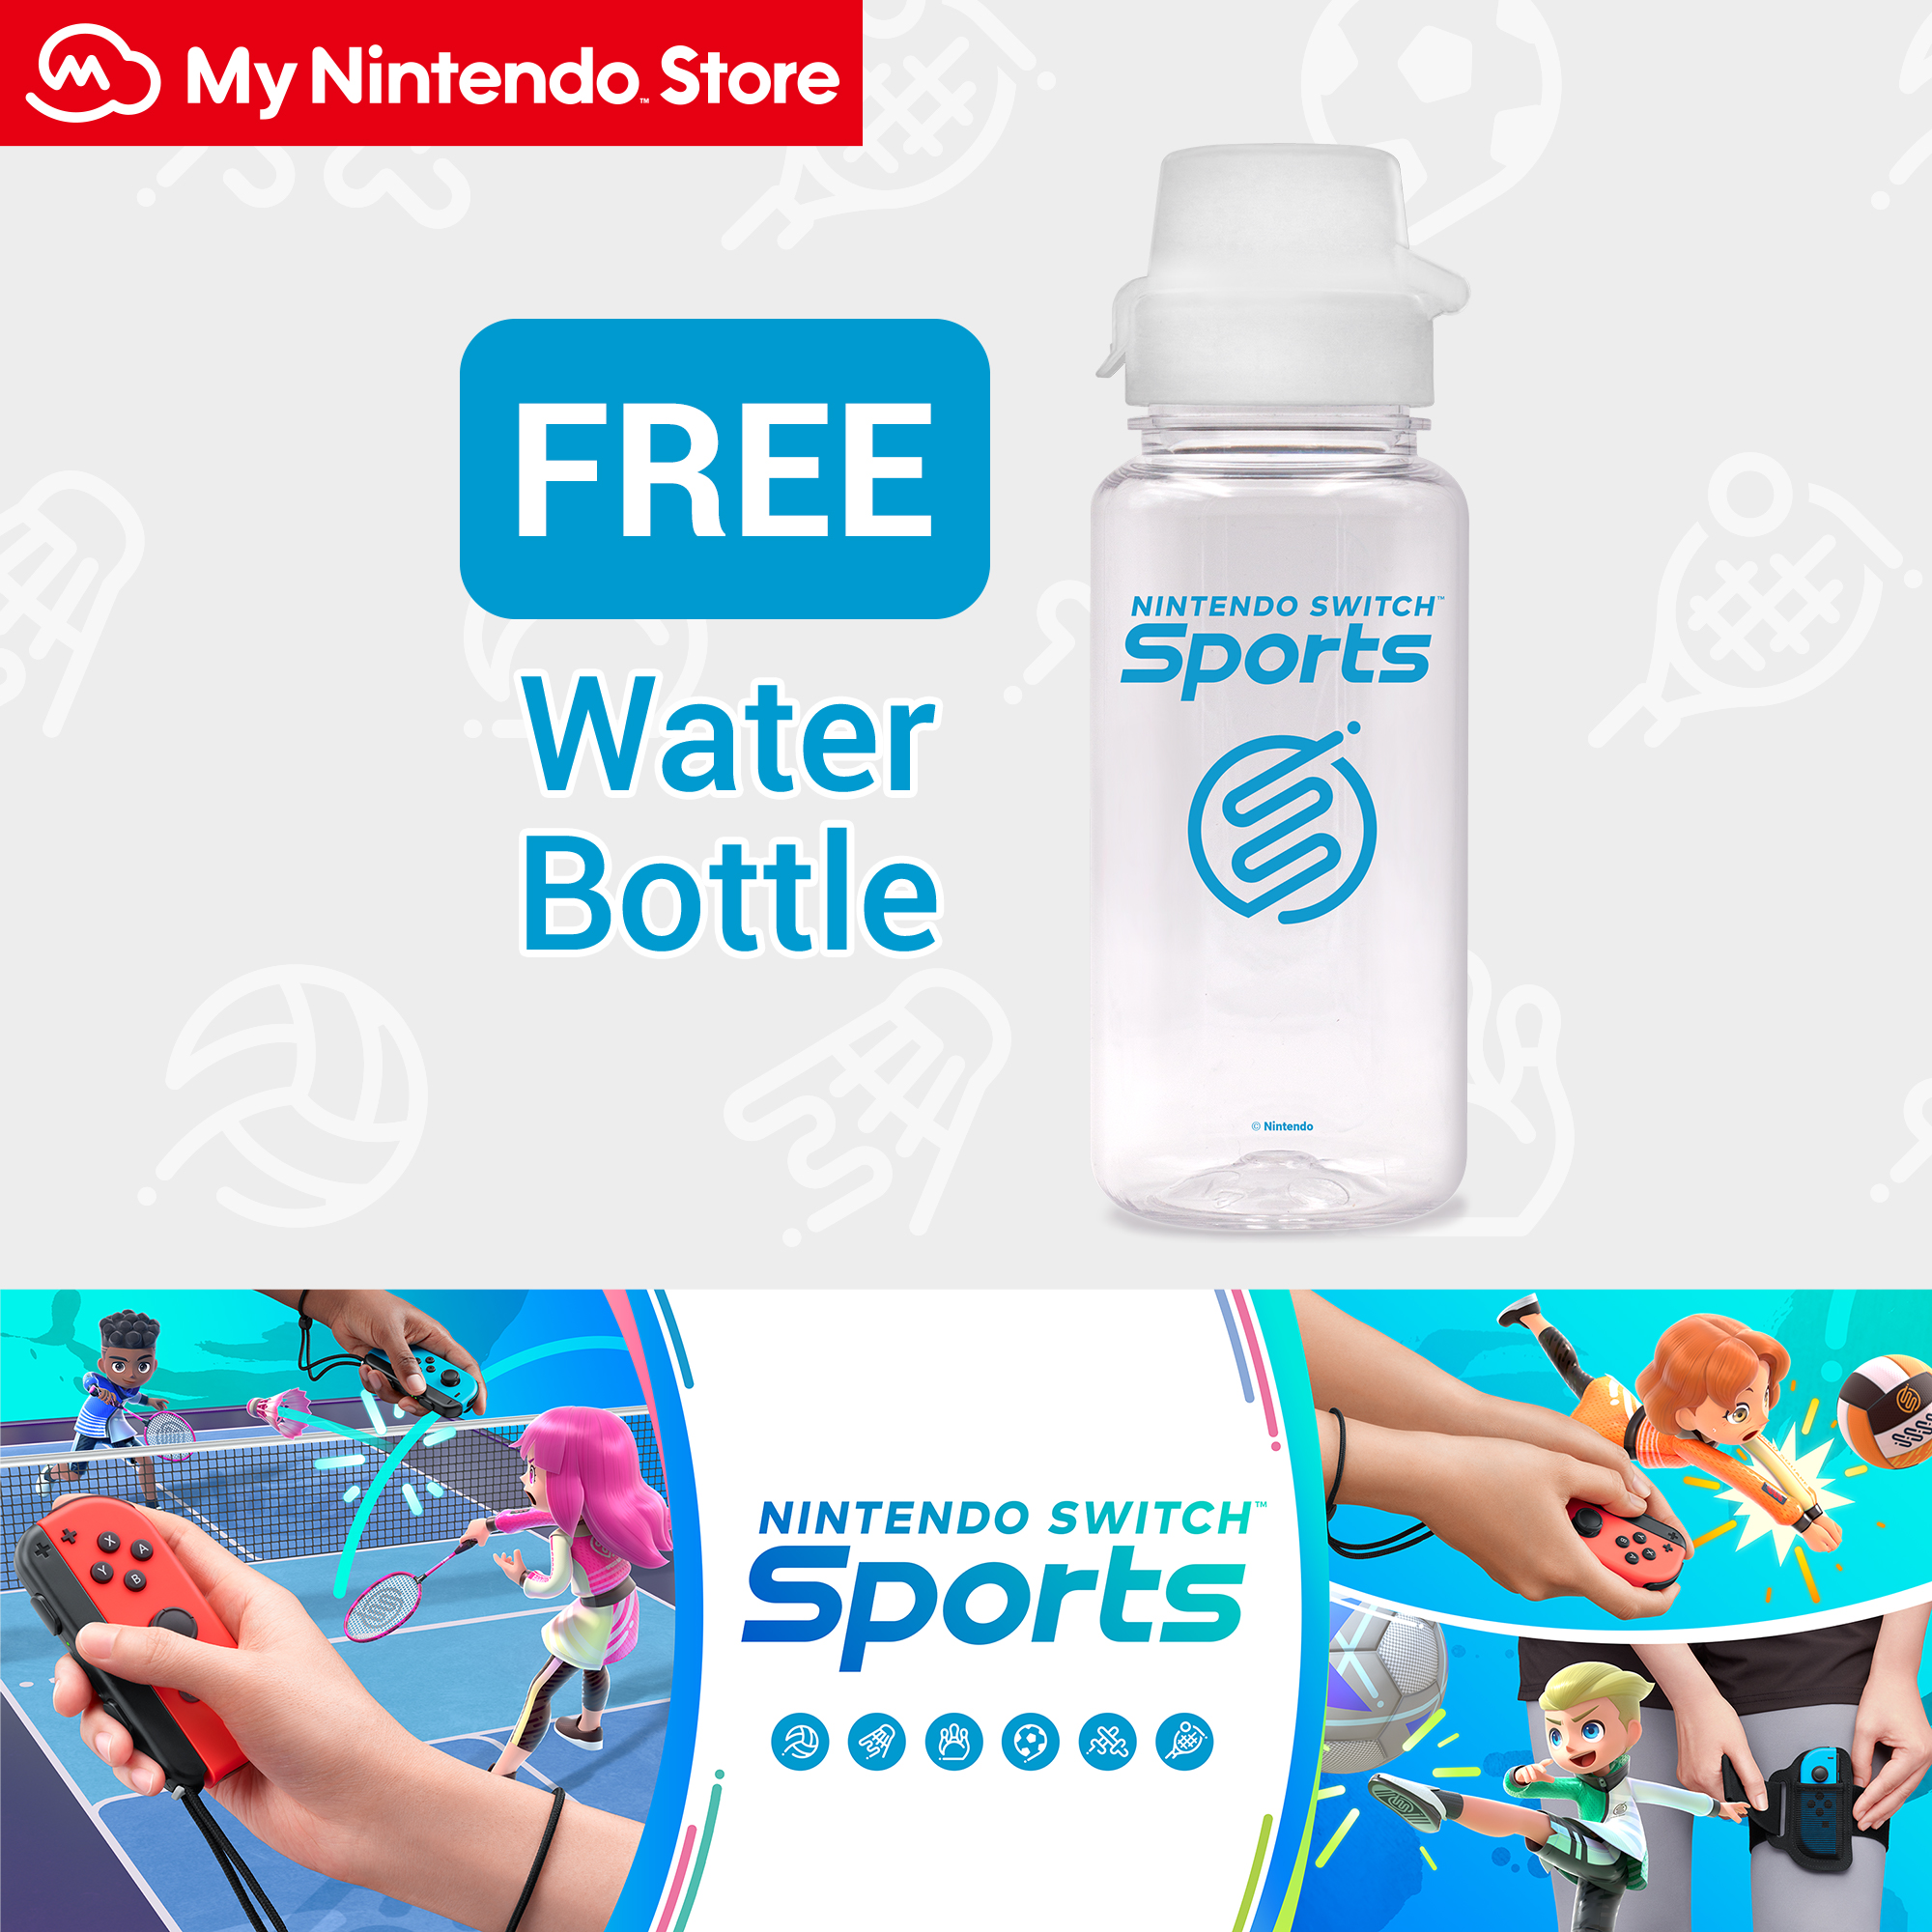 Pre-order Nintendo Switch Sports on My Nintendo Store and receive a free water bottle!